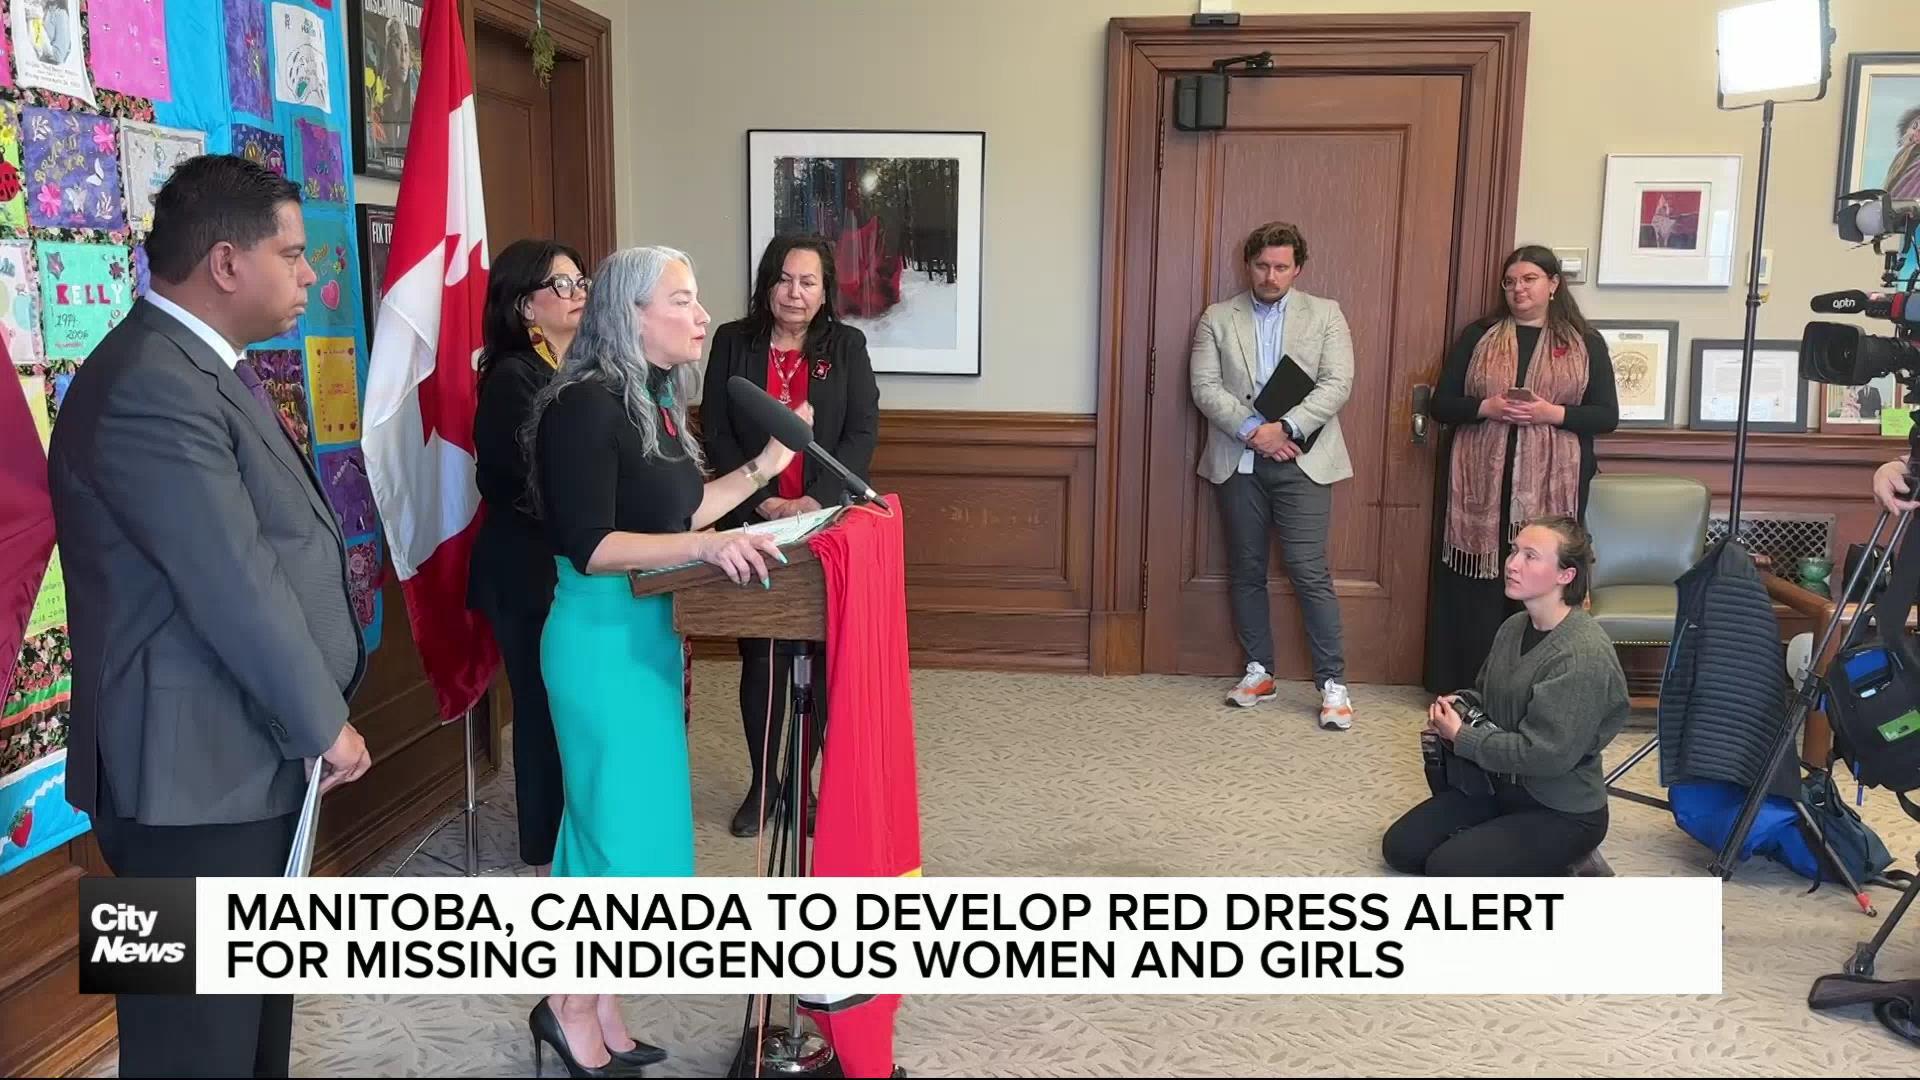 New Red Dress Alert system to be developed in Manitoba